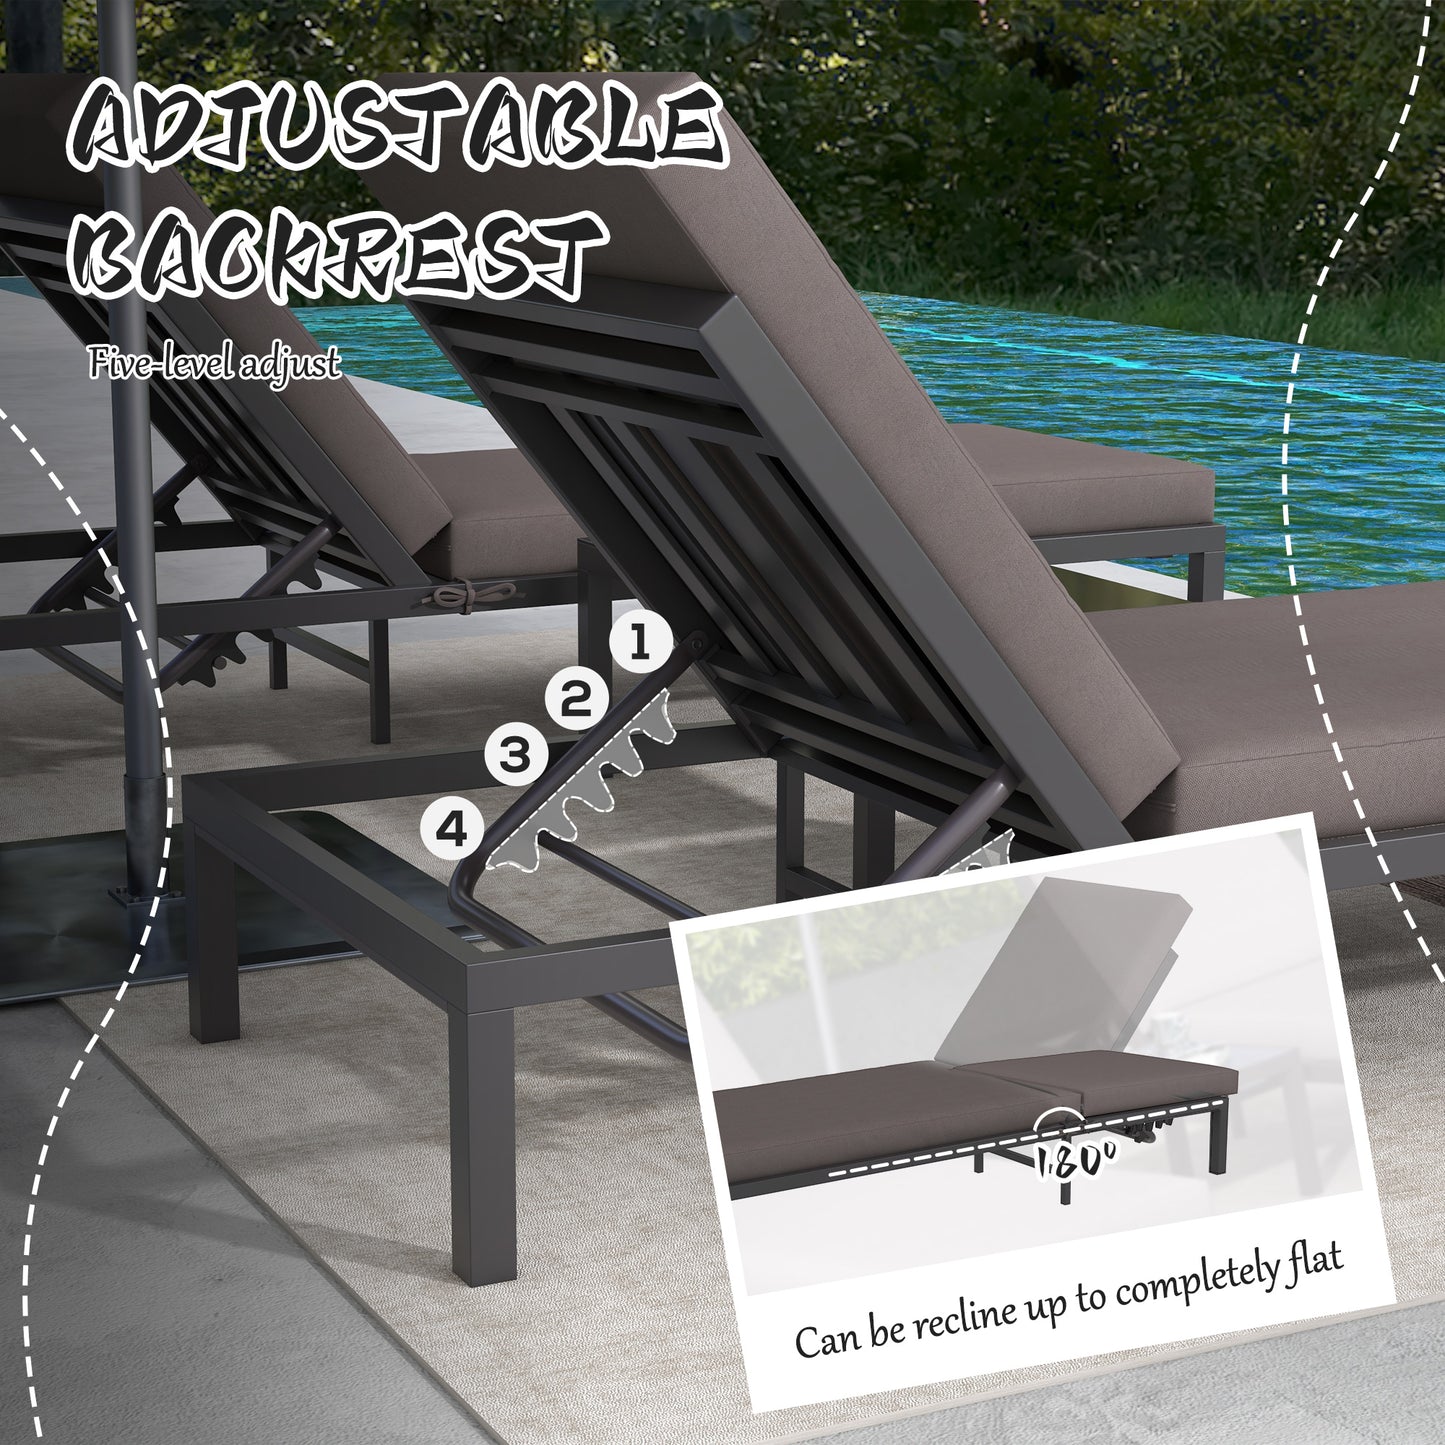 Outsunny 3 Pieces Garden Sun Loungers Set with Cushion, 5-level Adjustable Outdoor Recliner Bed Set w/ Glass Top Table, 2-In-1 Design